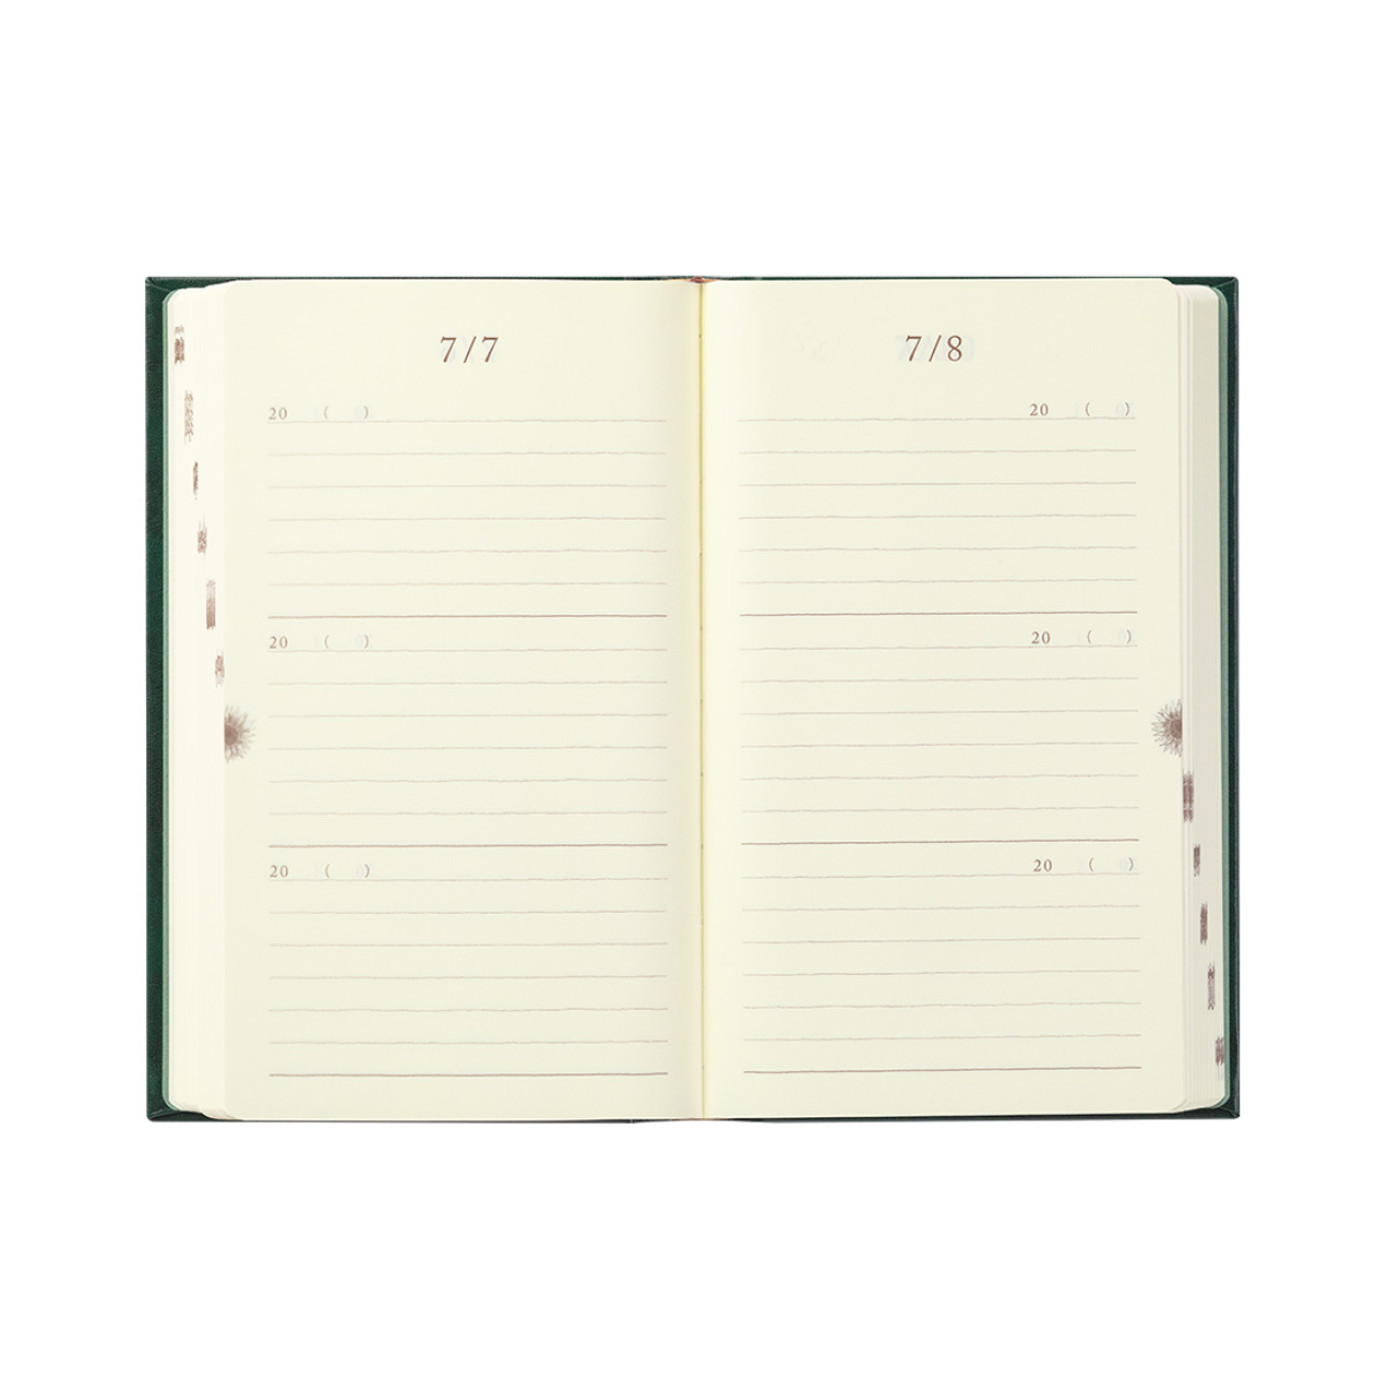 Midori 3 Year diary - recycled leather - Limited Edition